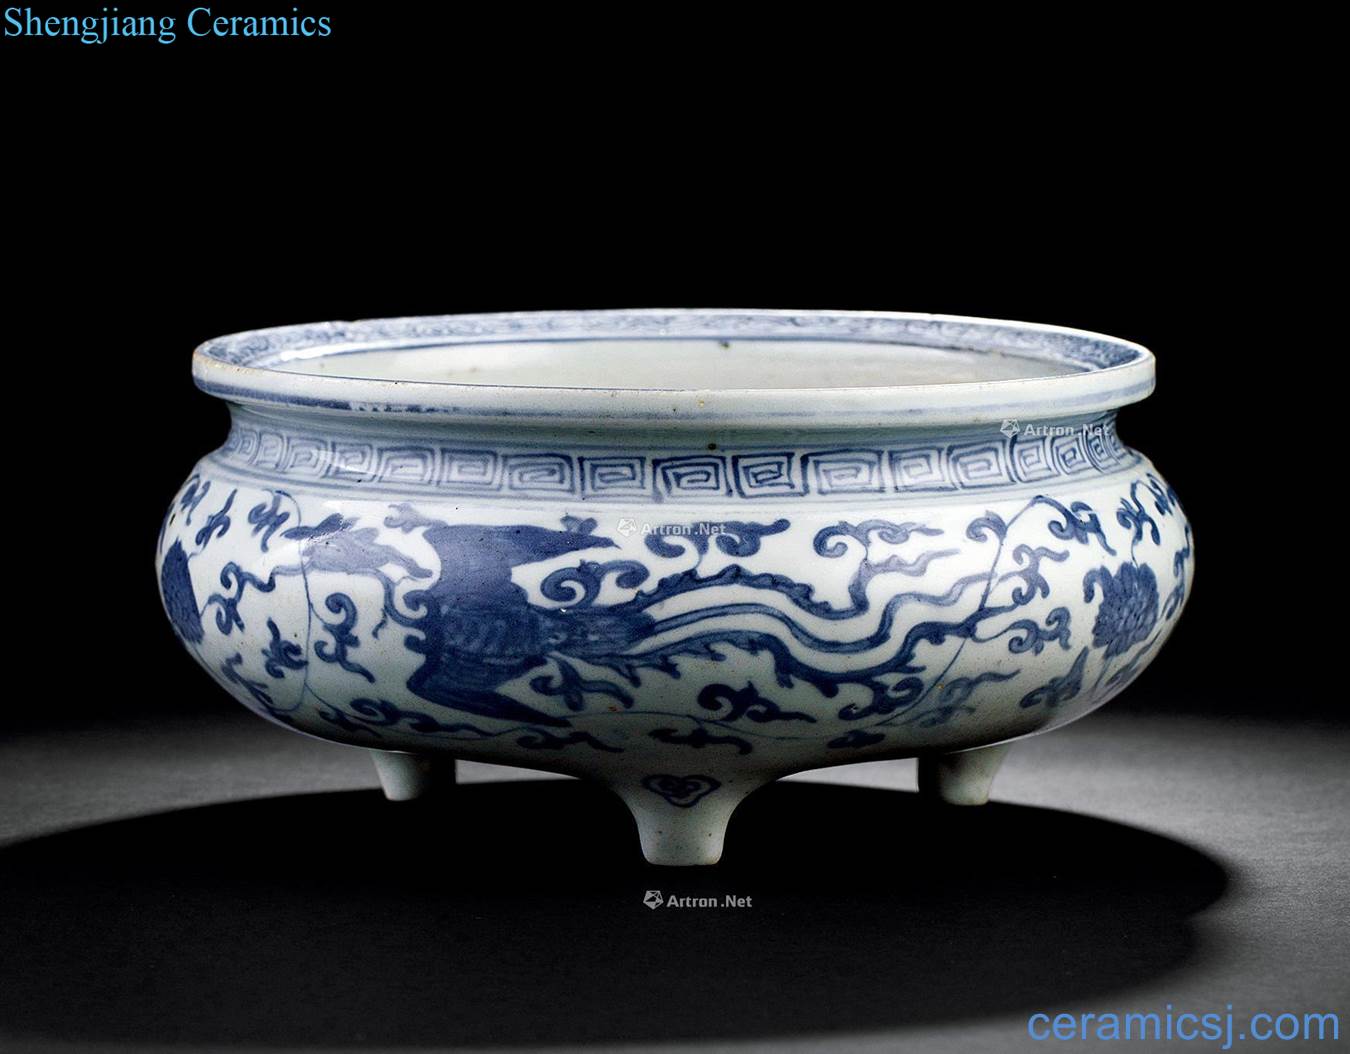 In the Ming dynasty (1368-1644) blue and white grain three-legged incense burner